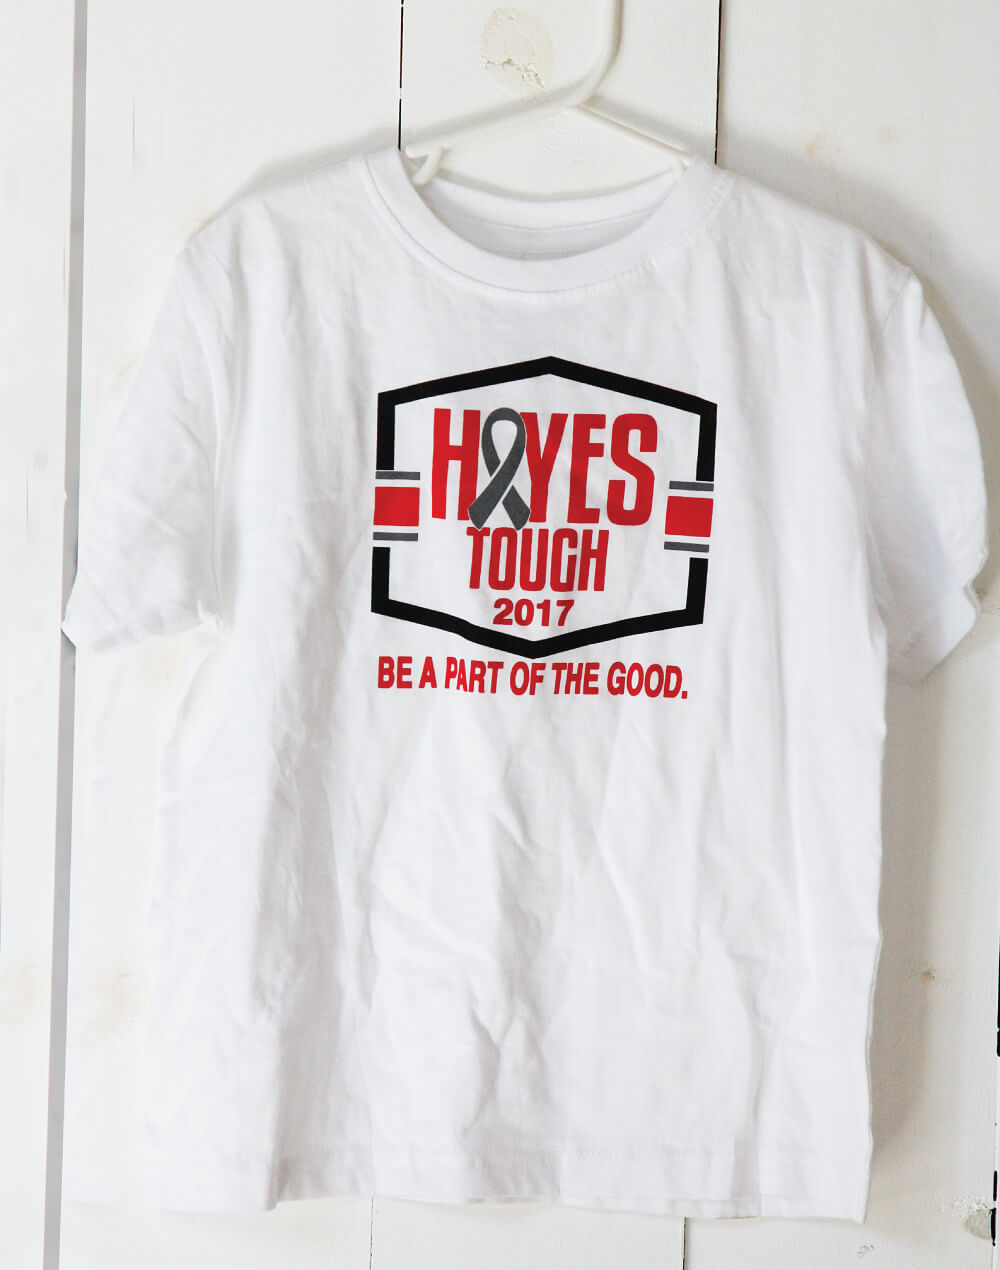 hayes tough t shirt off 62% - www 